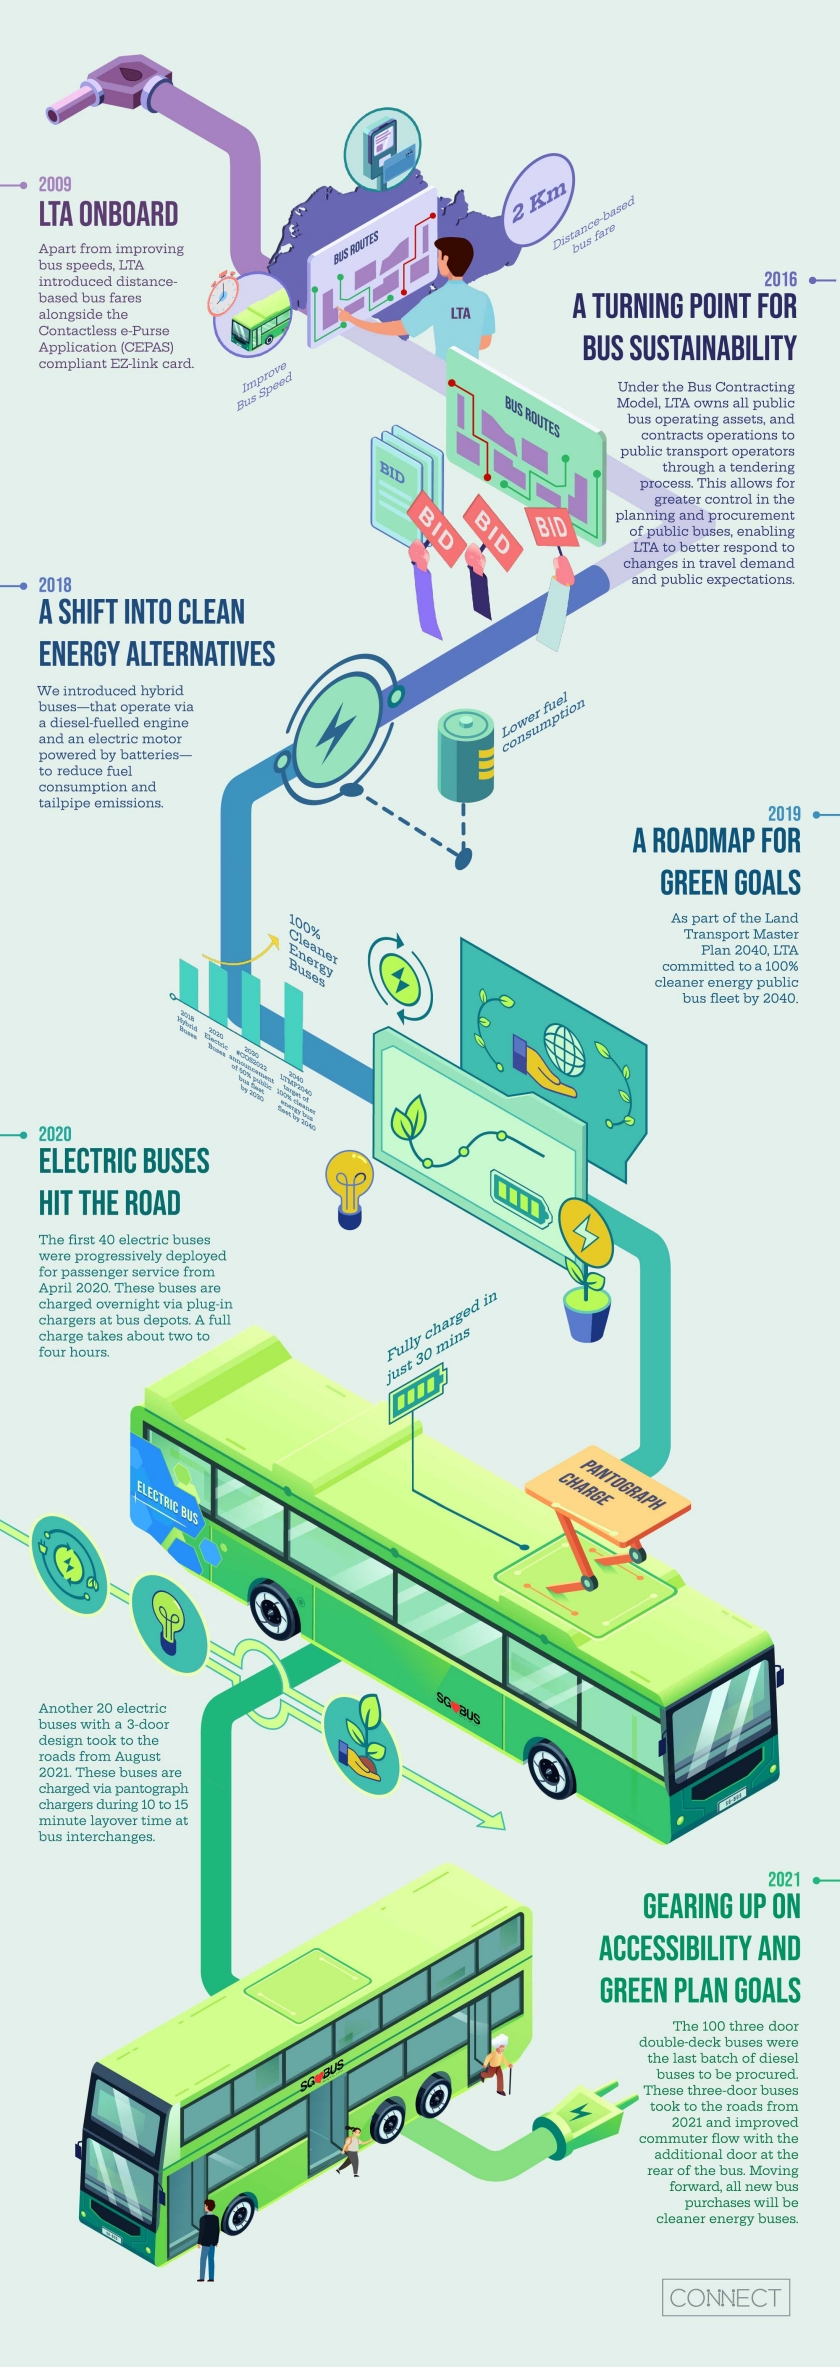 Infographic of the History of Buses milestones from 2009 to 2021